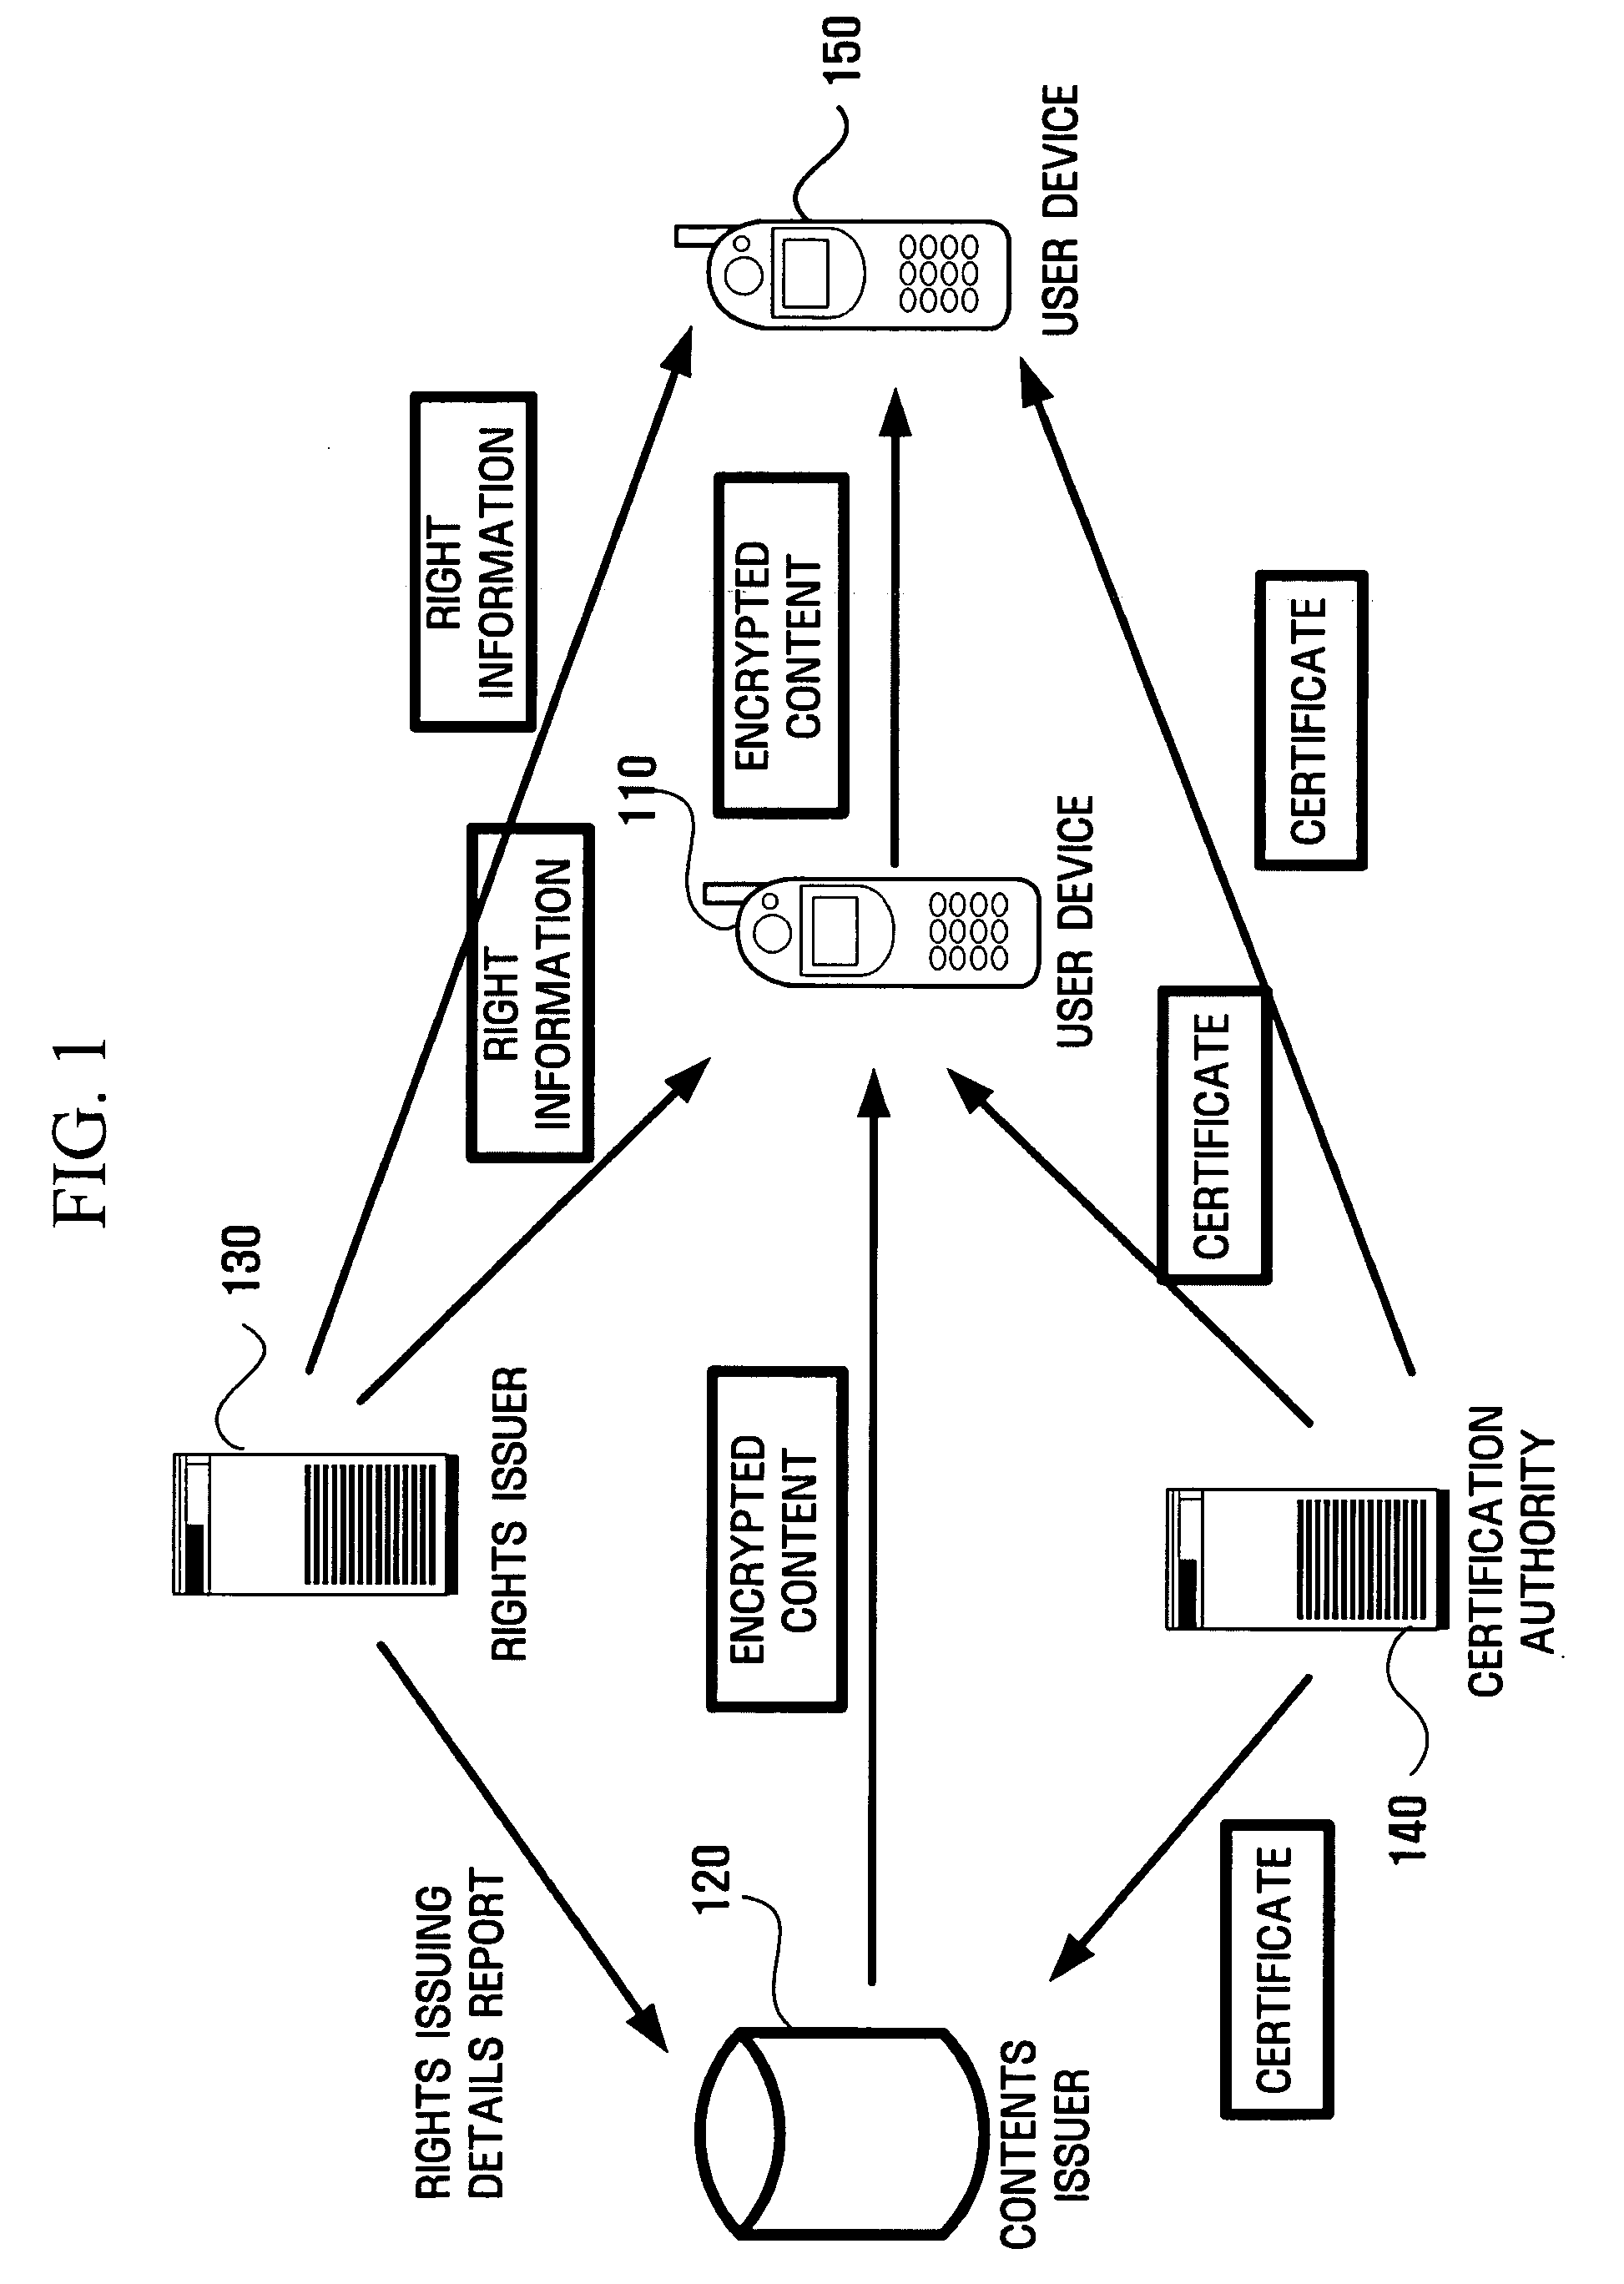 Method and apparatus for acquiring and removing information regarding digital rights objects